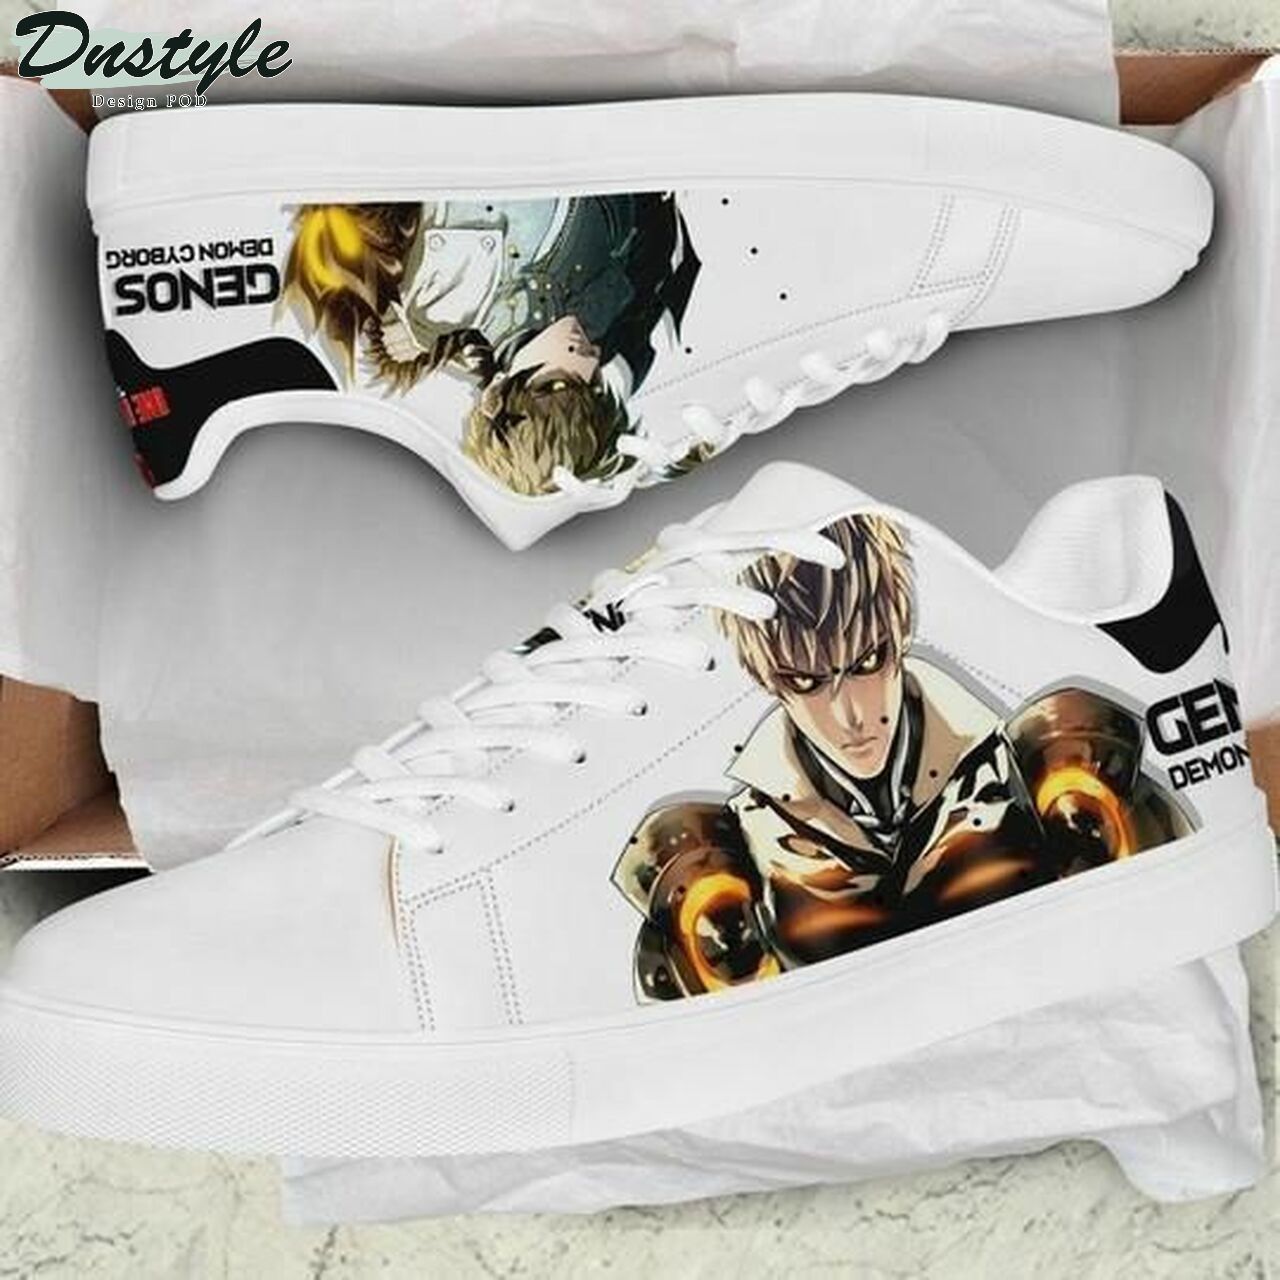 Genos one punch man stan smith low top skate shoes